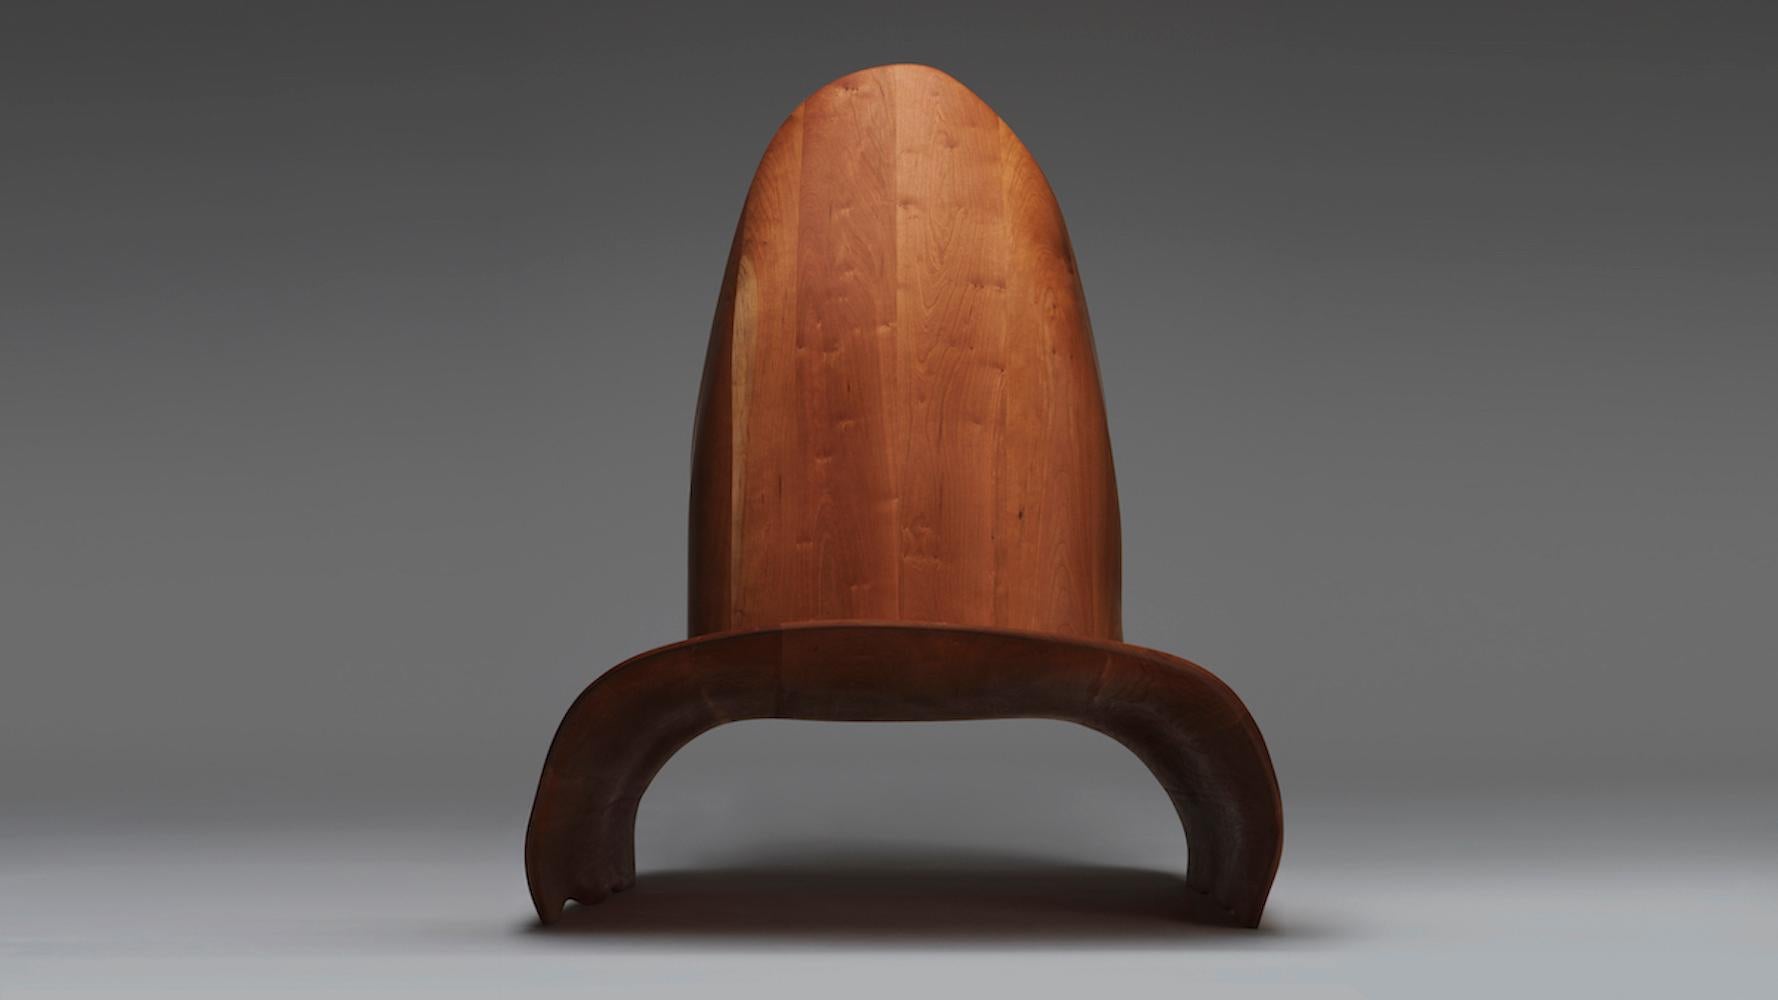 Edition of 8 + 4 Artist Proofs.
Lead time 4 months.


Kutitji | Shield Chair by Errol Evans + Trent Jansen
American cherry and American walnut

Kutitji Chair (Shield), designed by Errol Evans and Trent Jansen, results from Errol’s passion for